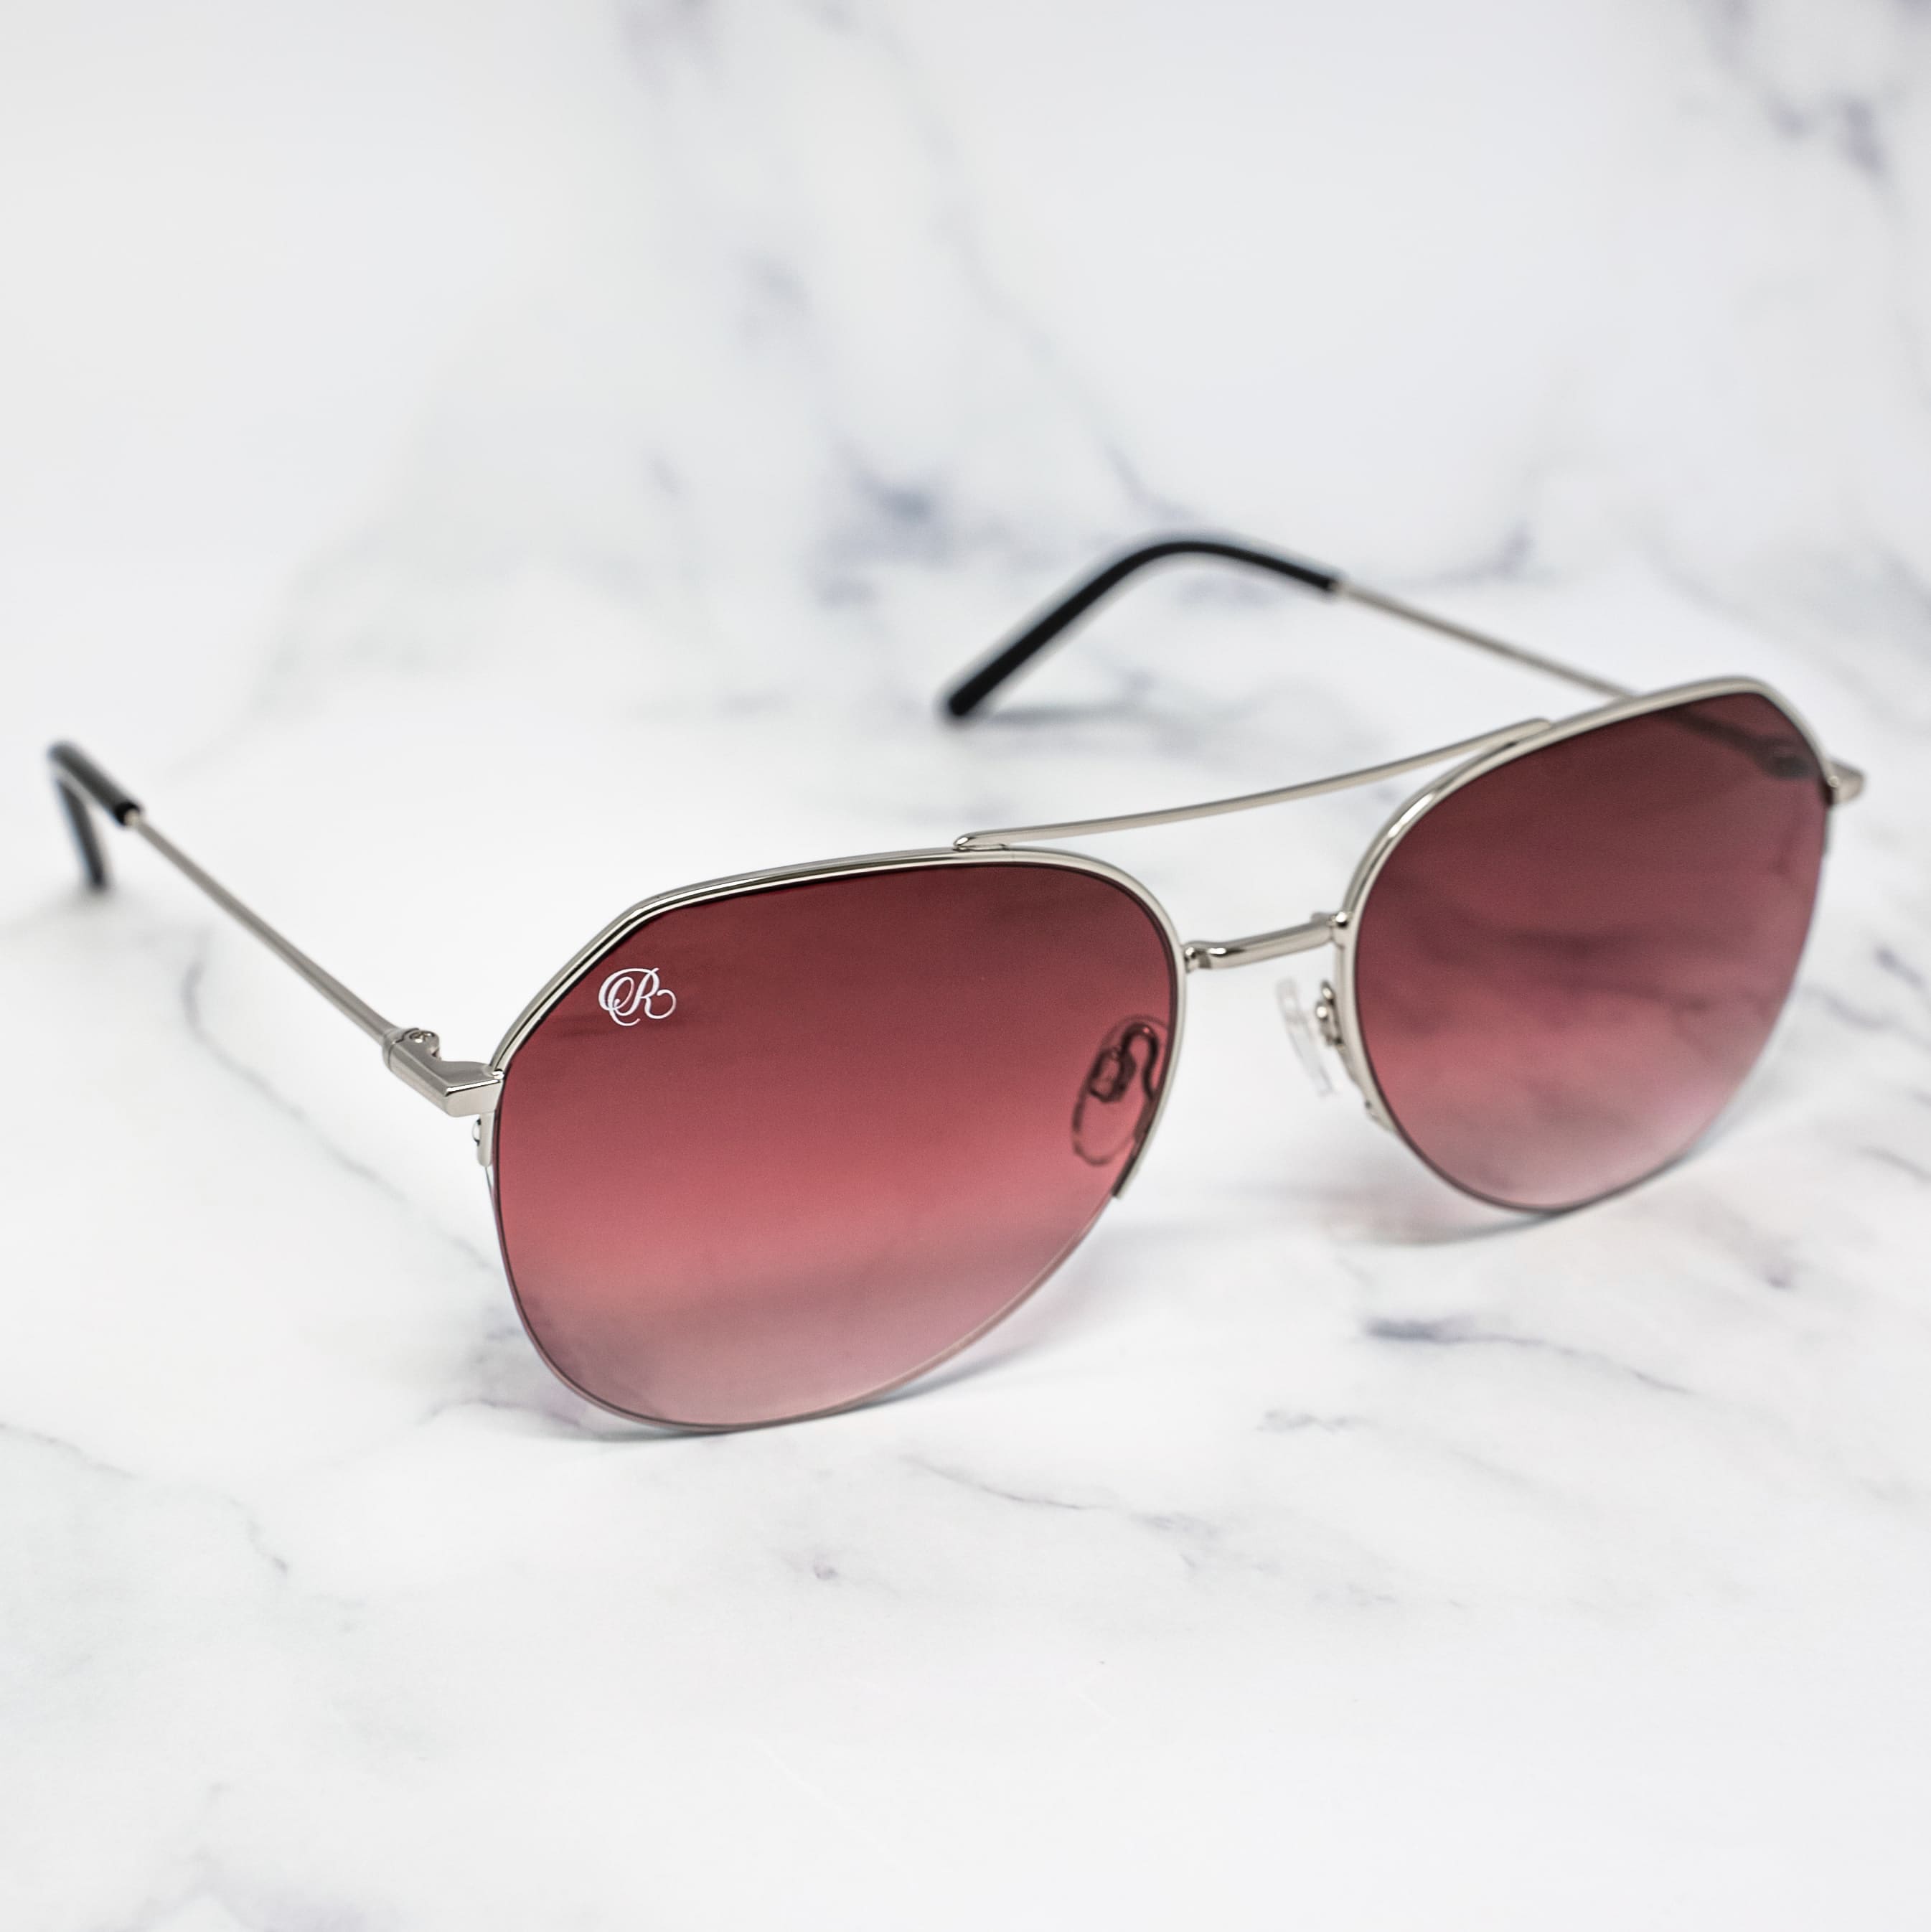 THE ACE - BURGUNDY SILVER